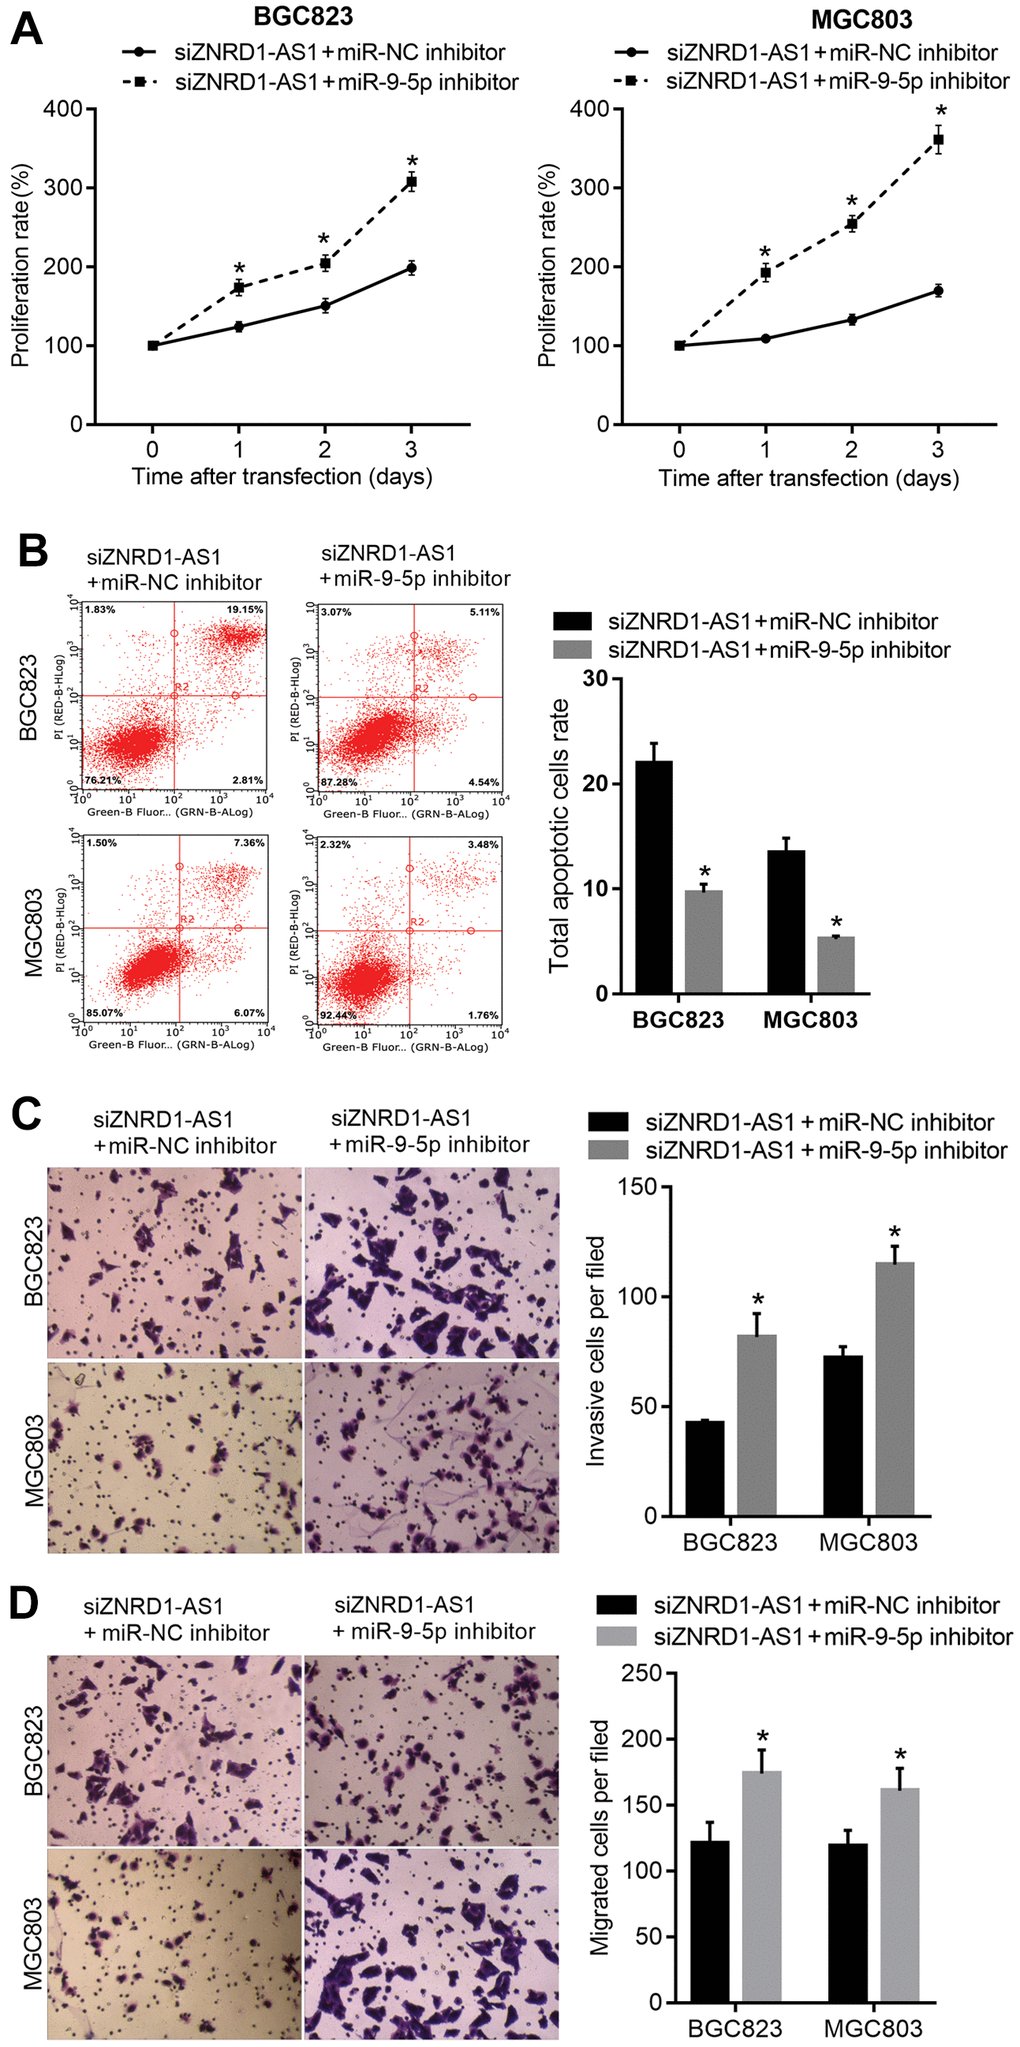 miR-9-5p inhibitor rescues the effect of ZNRD1-AS1 knockdown on malignant characteristics and apoptosis. miR-9-5p inhibitor was cotransfected into MGC803 and BGC823 cells; with cotransfection of siZNRD1-AS1 and miR-NC inhibitor as control. Cell proliferation (A) and apoptosis (B) were analyzed by CCK8 assays and flow cytometry, respectively. Cell invasion (C) and migration (D) were analyzed by Transwell assays. Left panels show representative micrographs. Right panels show statistical results. *p 